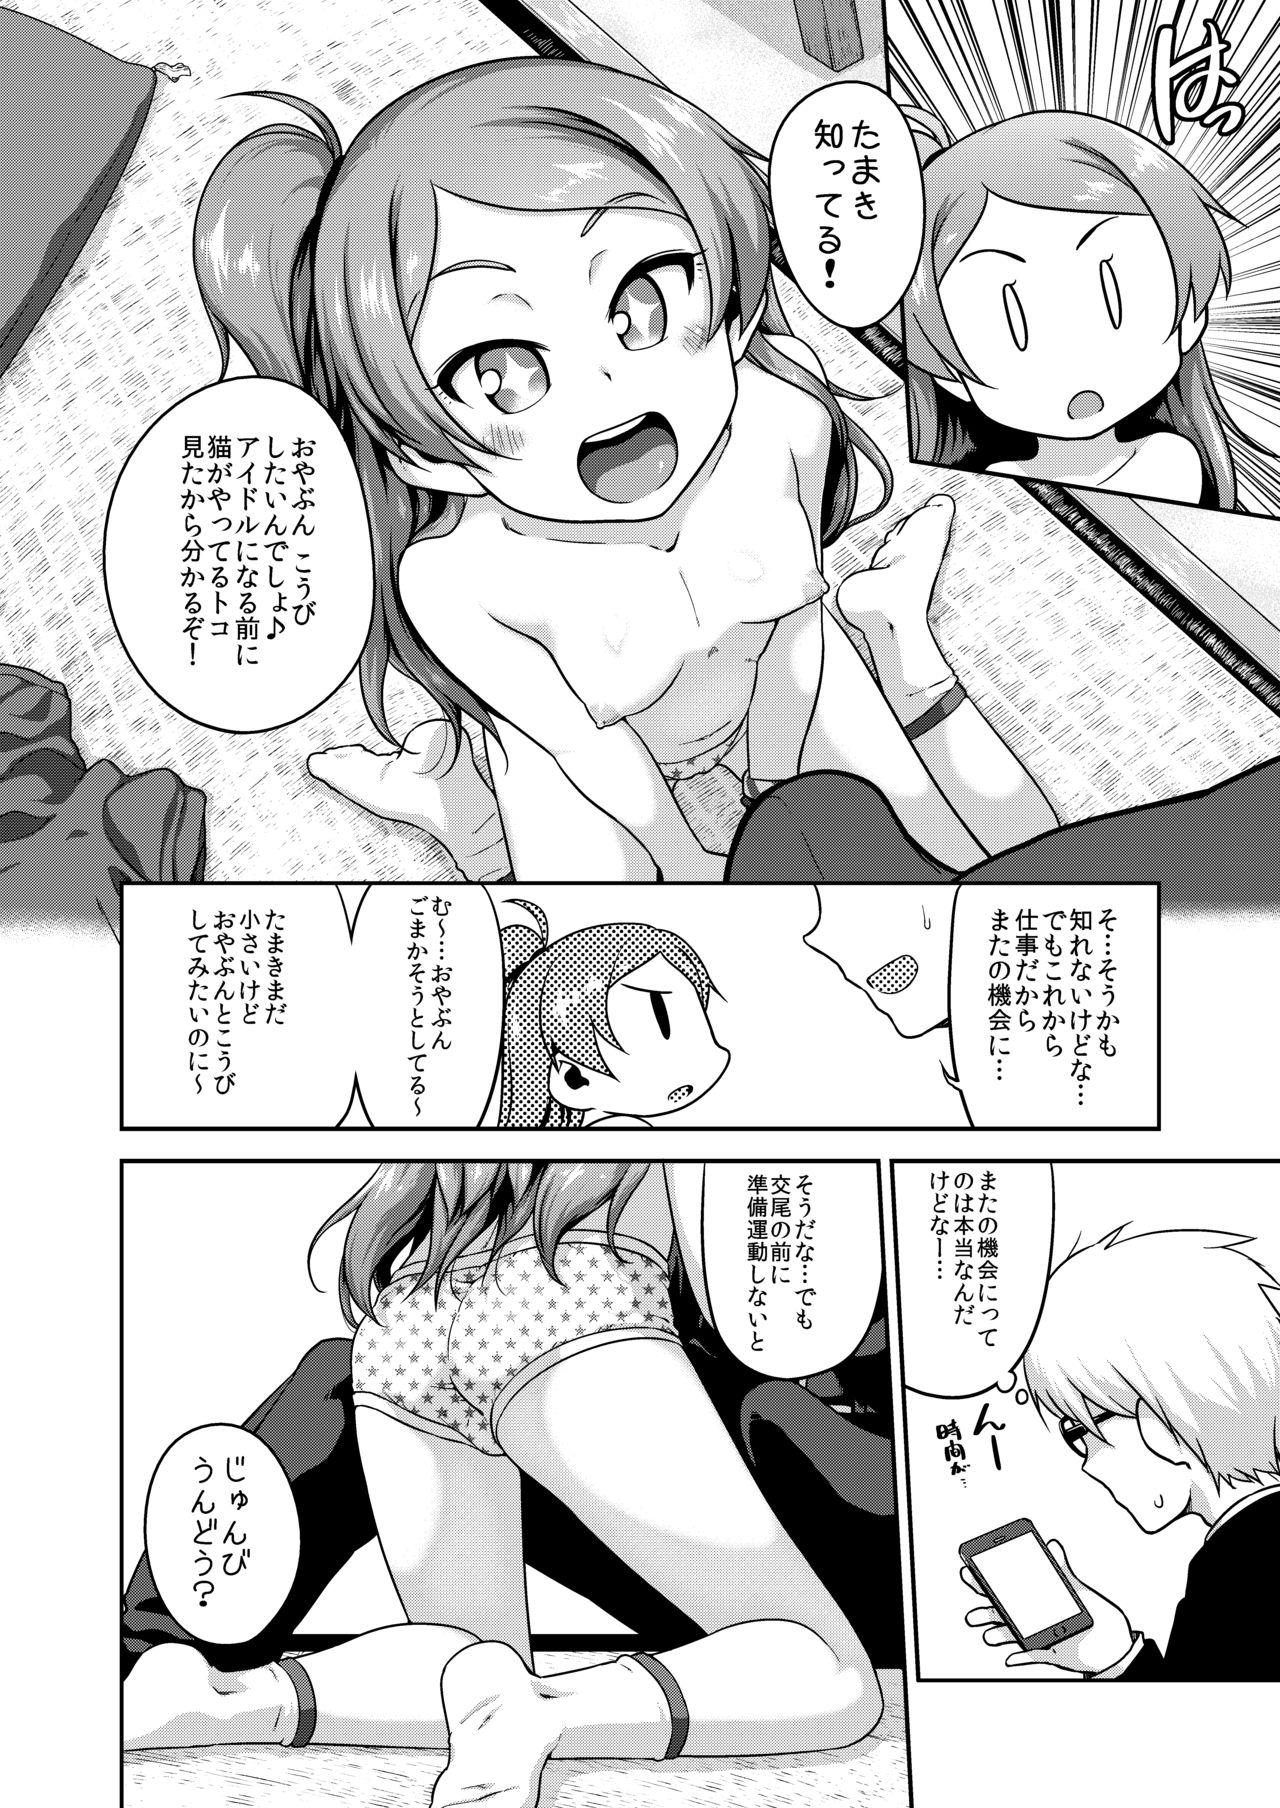 Sloppy Bouncing - The idolmaster Asian - Page 3